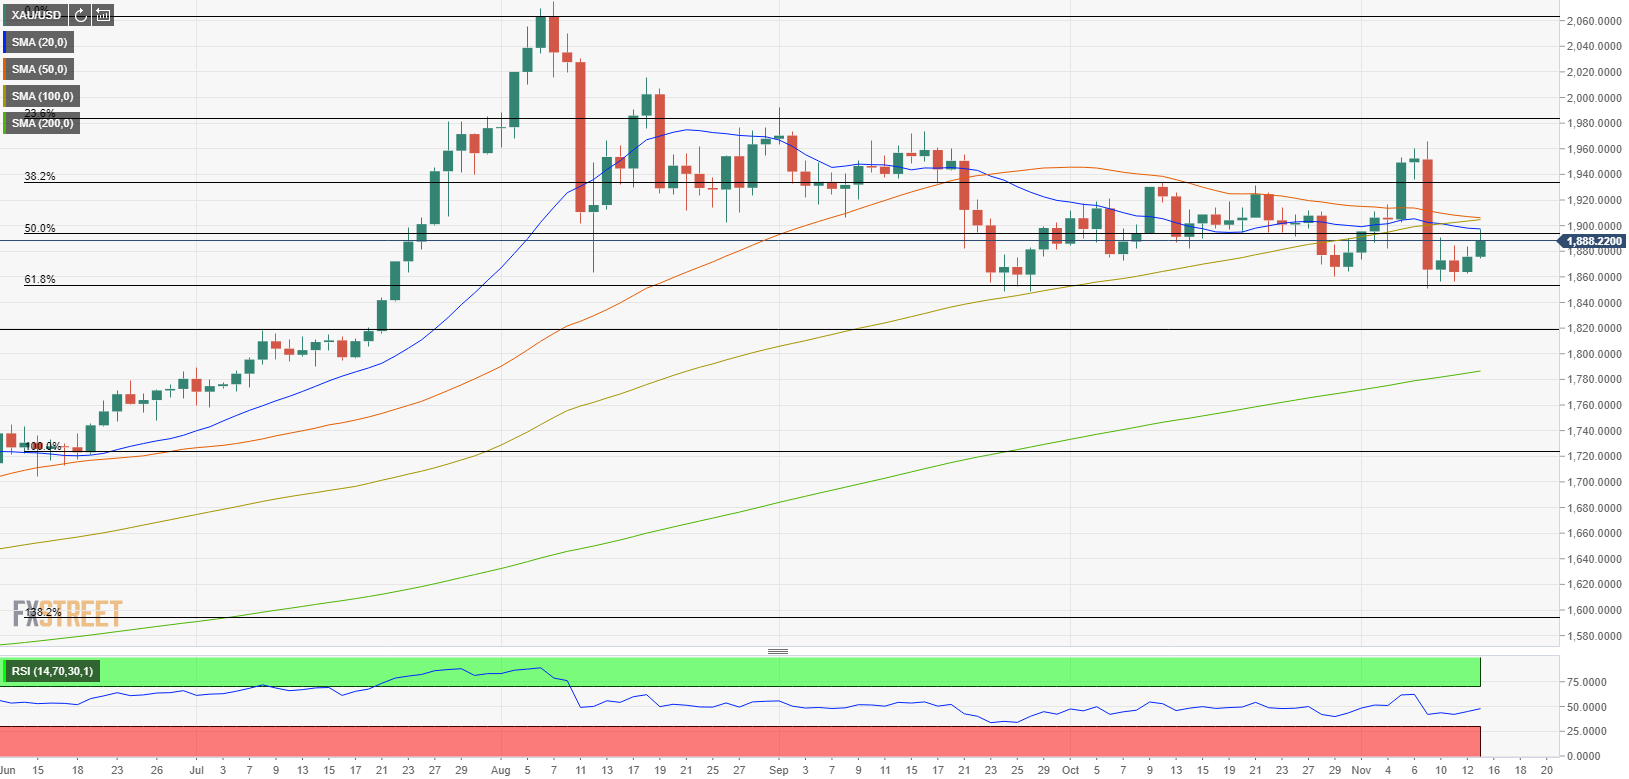 Gold Price Analysis: XAU/USD could extend rebound with daily close above $1,900